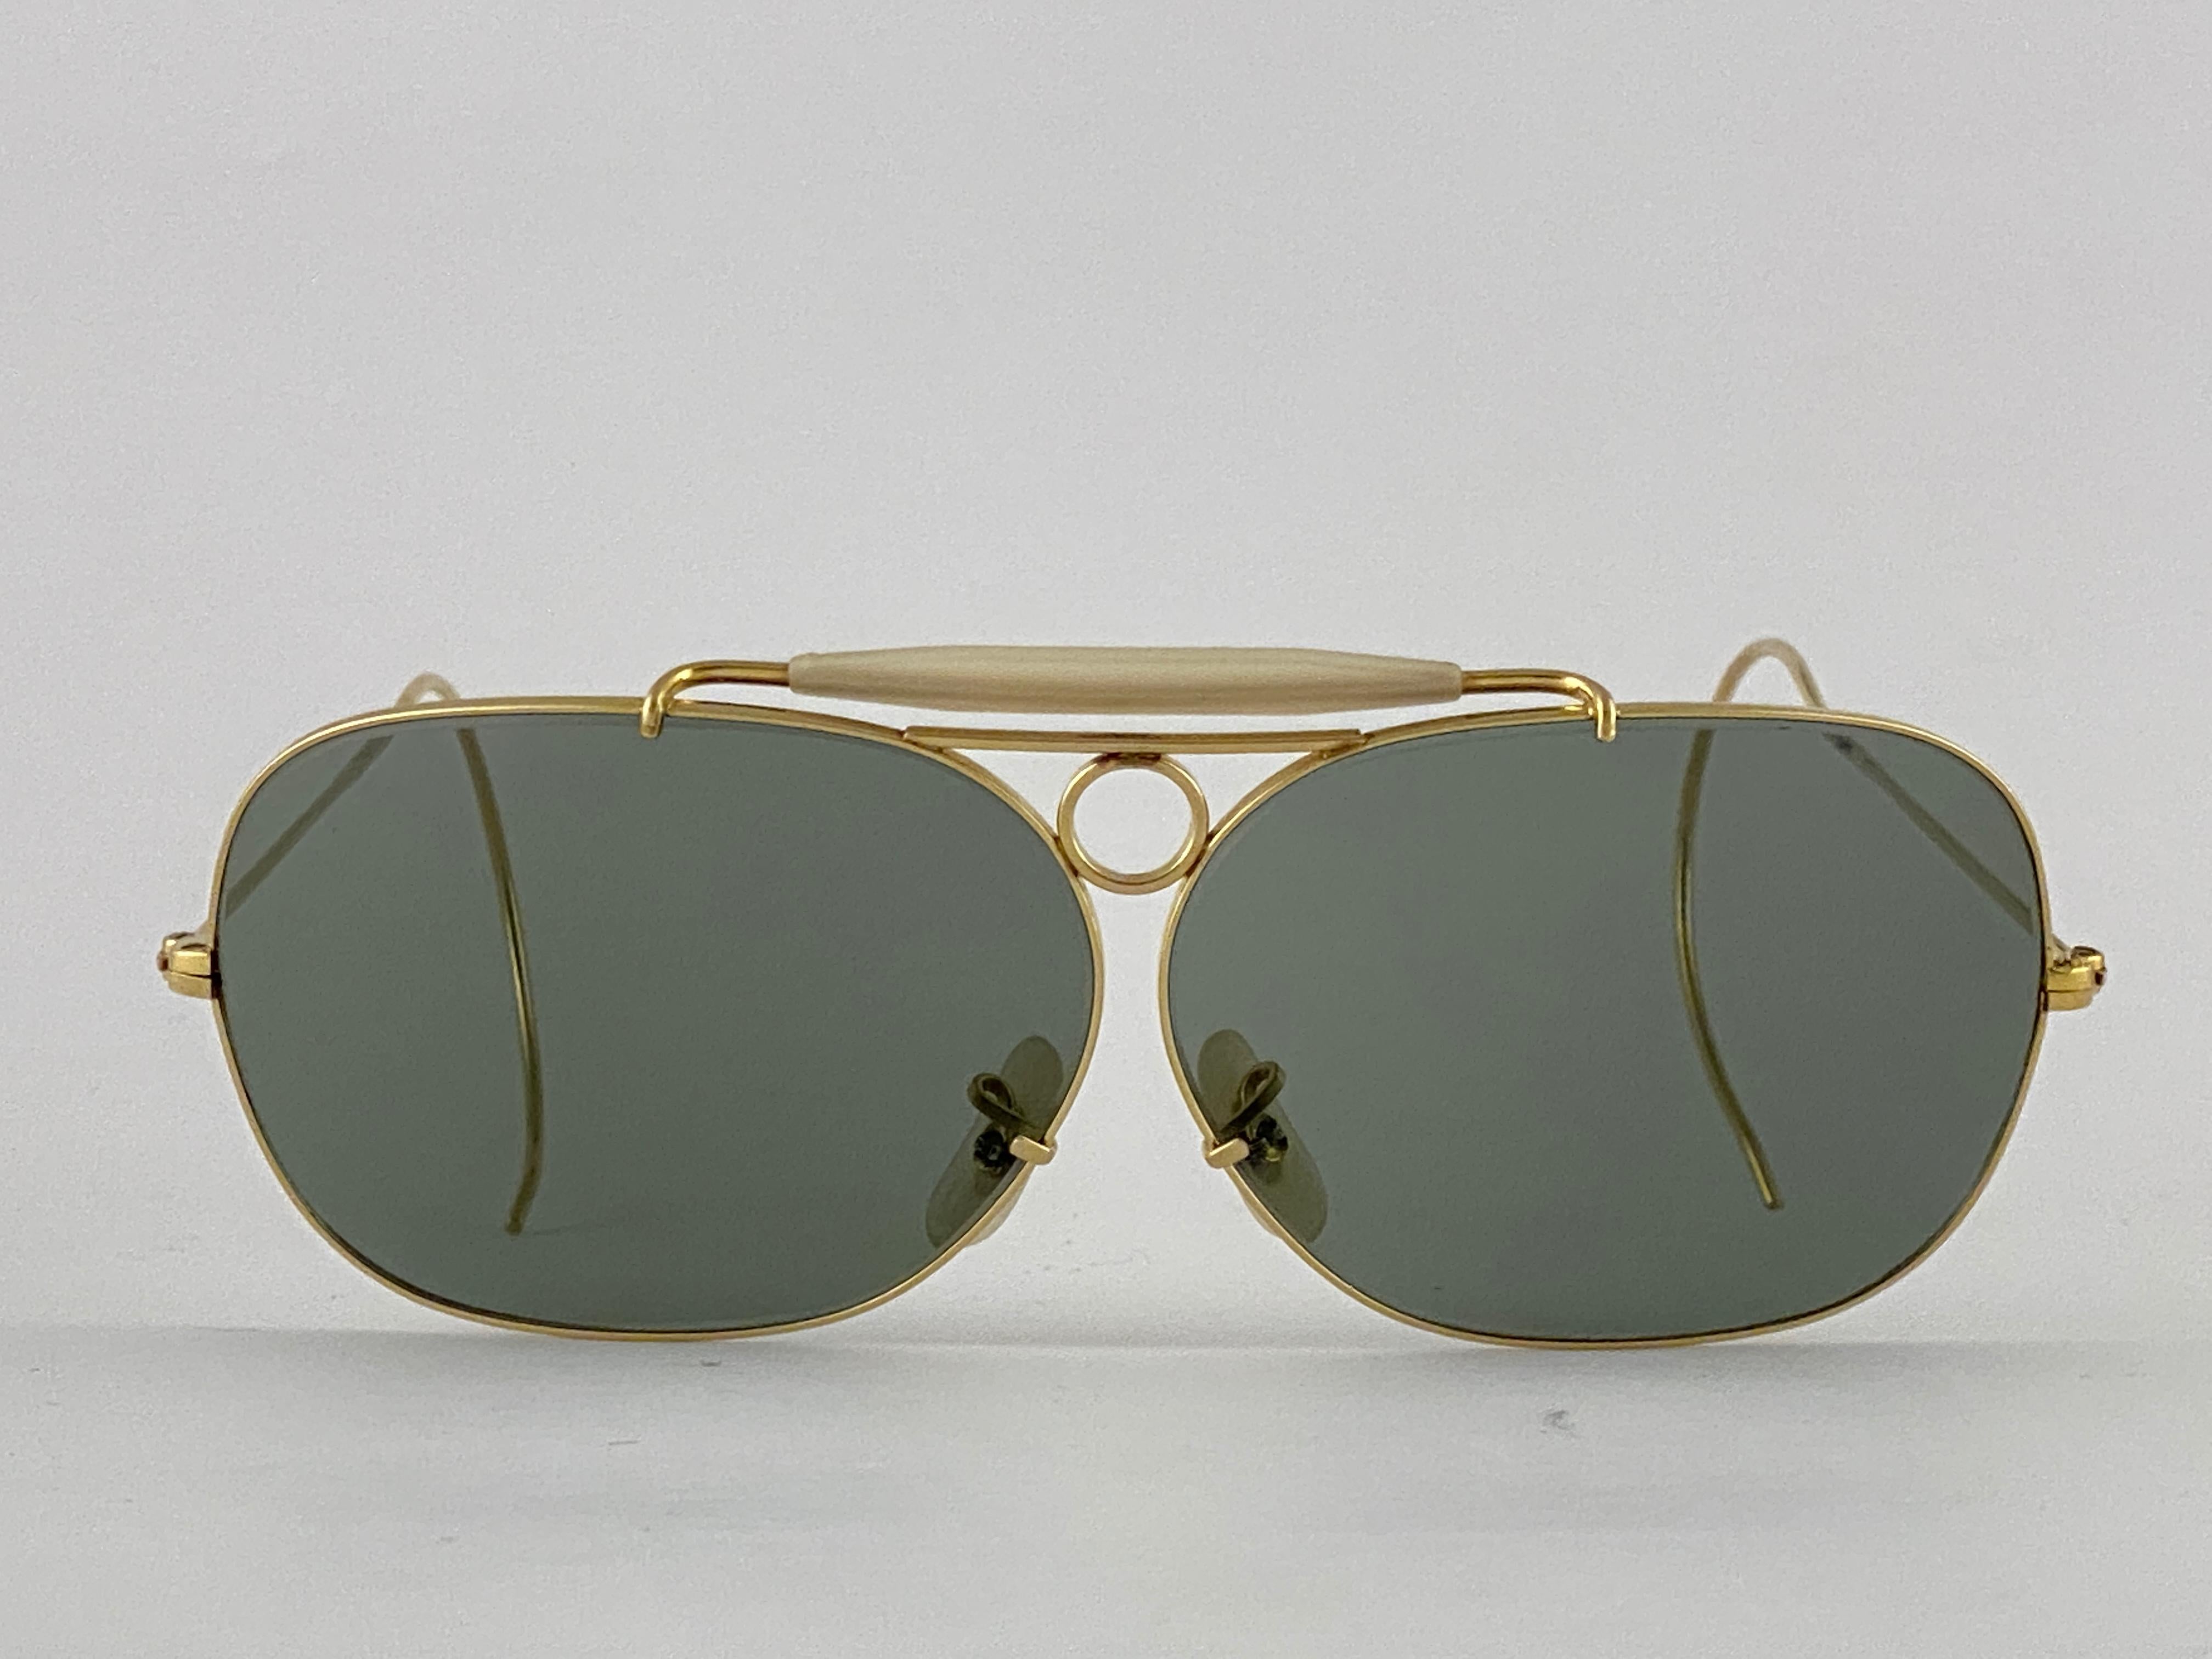 New Vintage Ray Ban Decot 10 K gold frame holding  pair of grey G15 lenses.

Made in USA.

Comes with its original Ray Ban B&L case.

Please notice this item is nearly 50 years old and may show sign of wear due to storage.